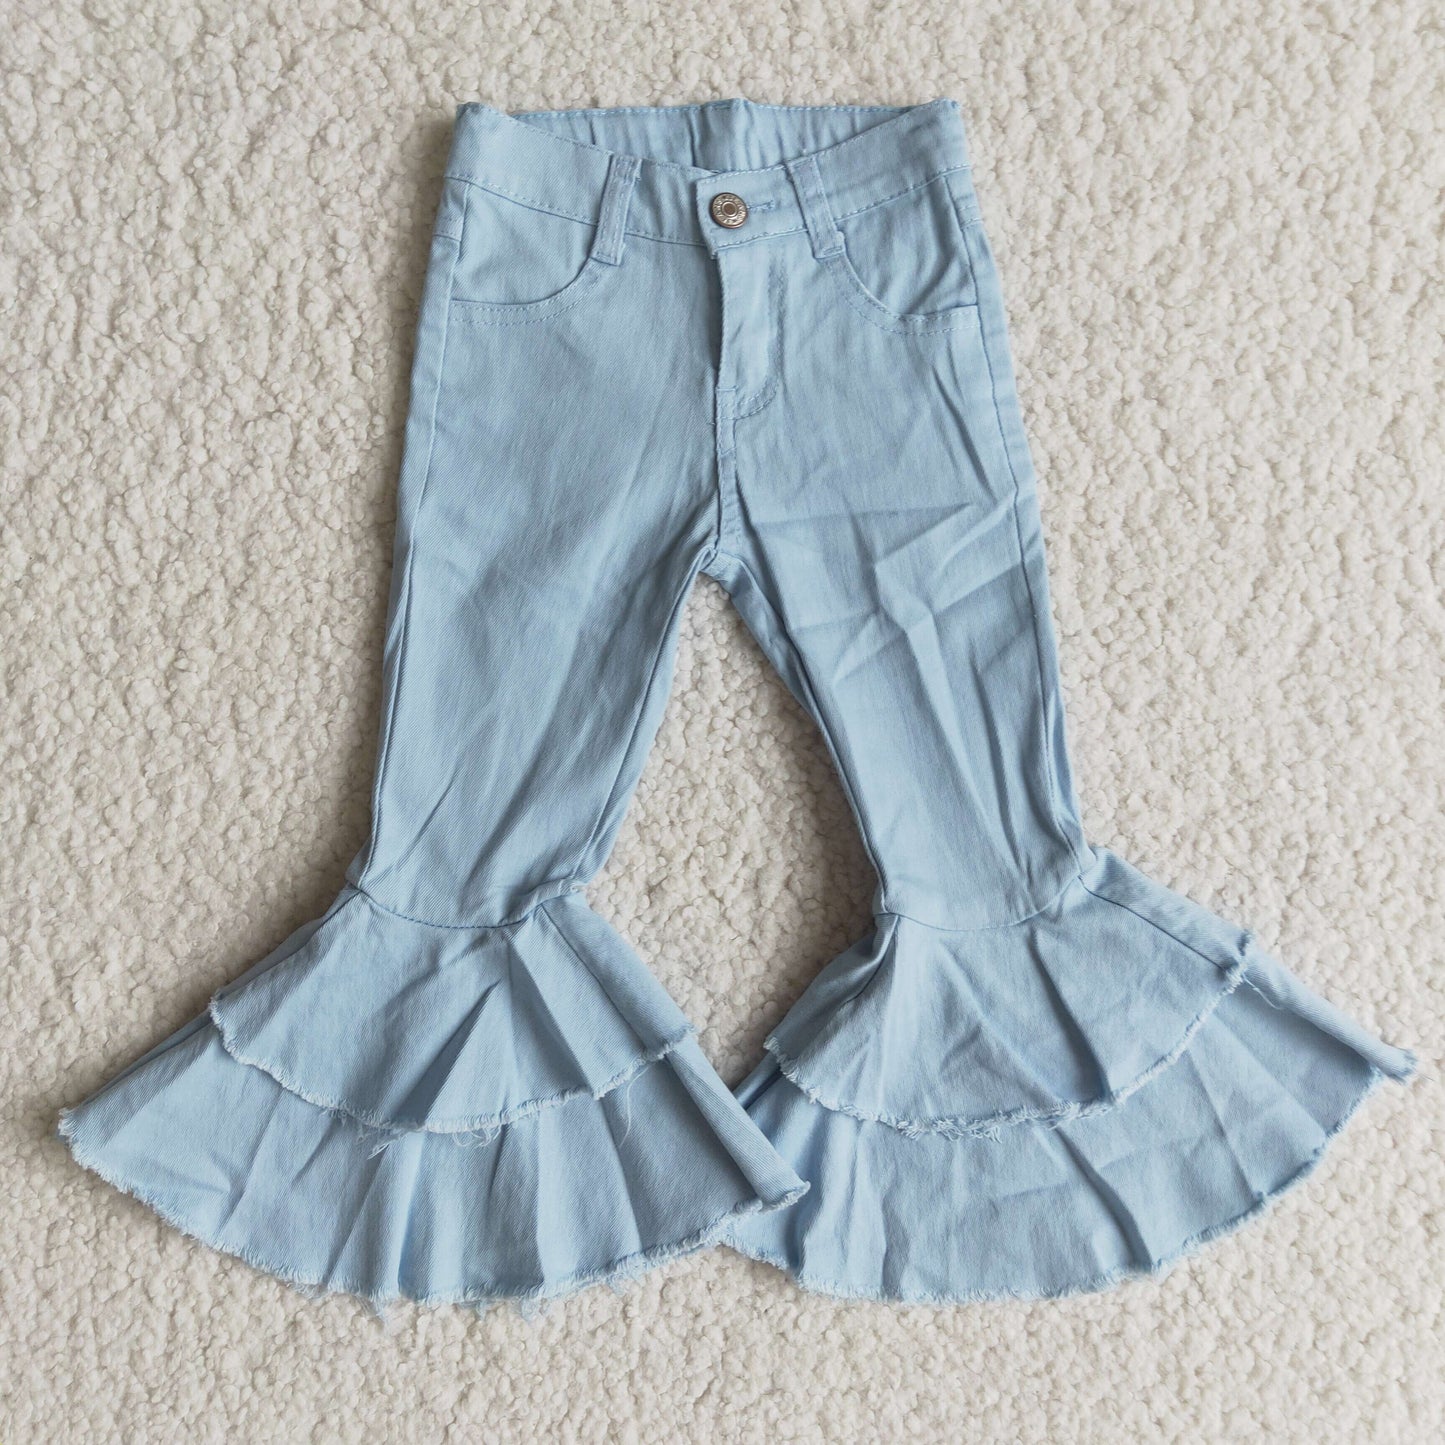 Baby girl's solid color bell bottom jeans